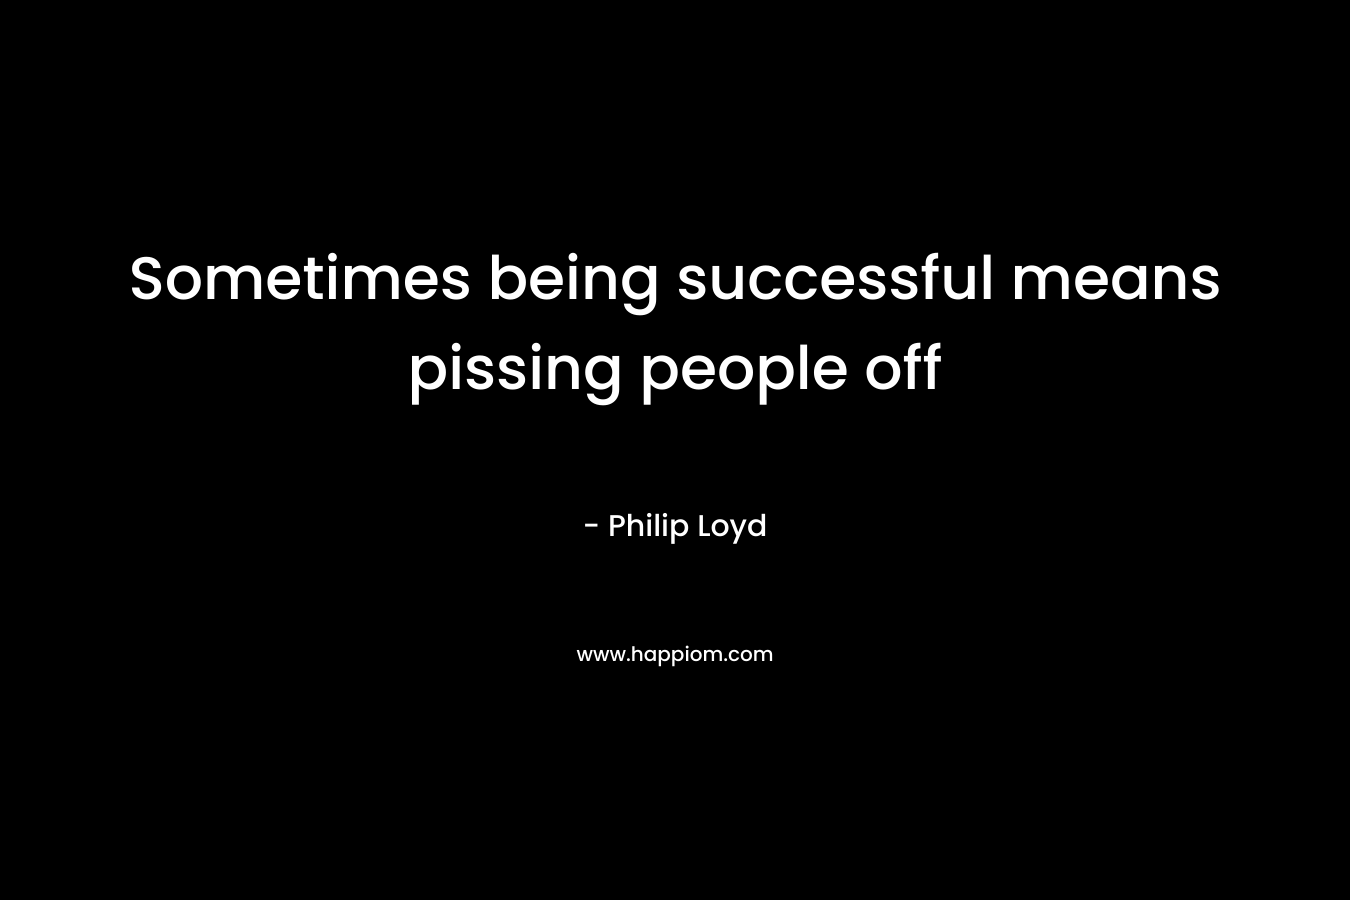 Sometimes being successful means pissing people off